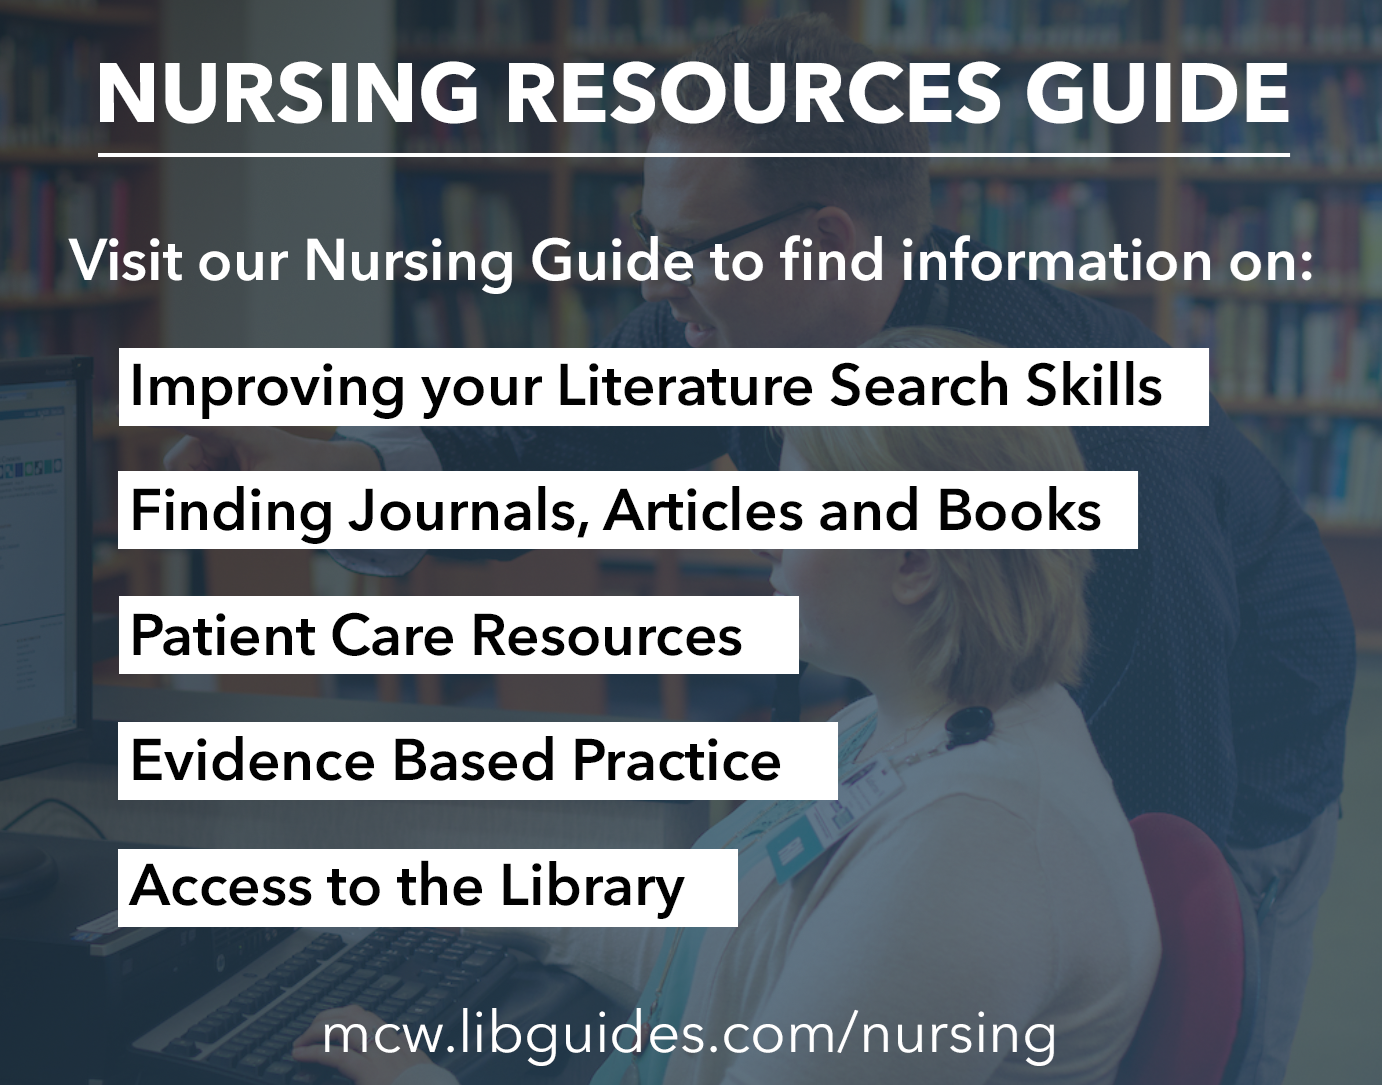 Nursing Resources Guide, MCW Libraries